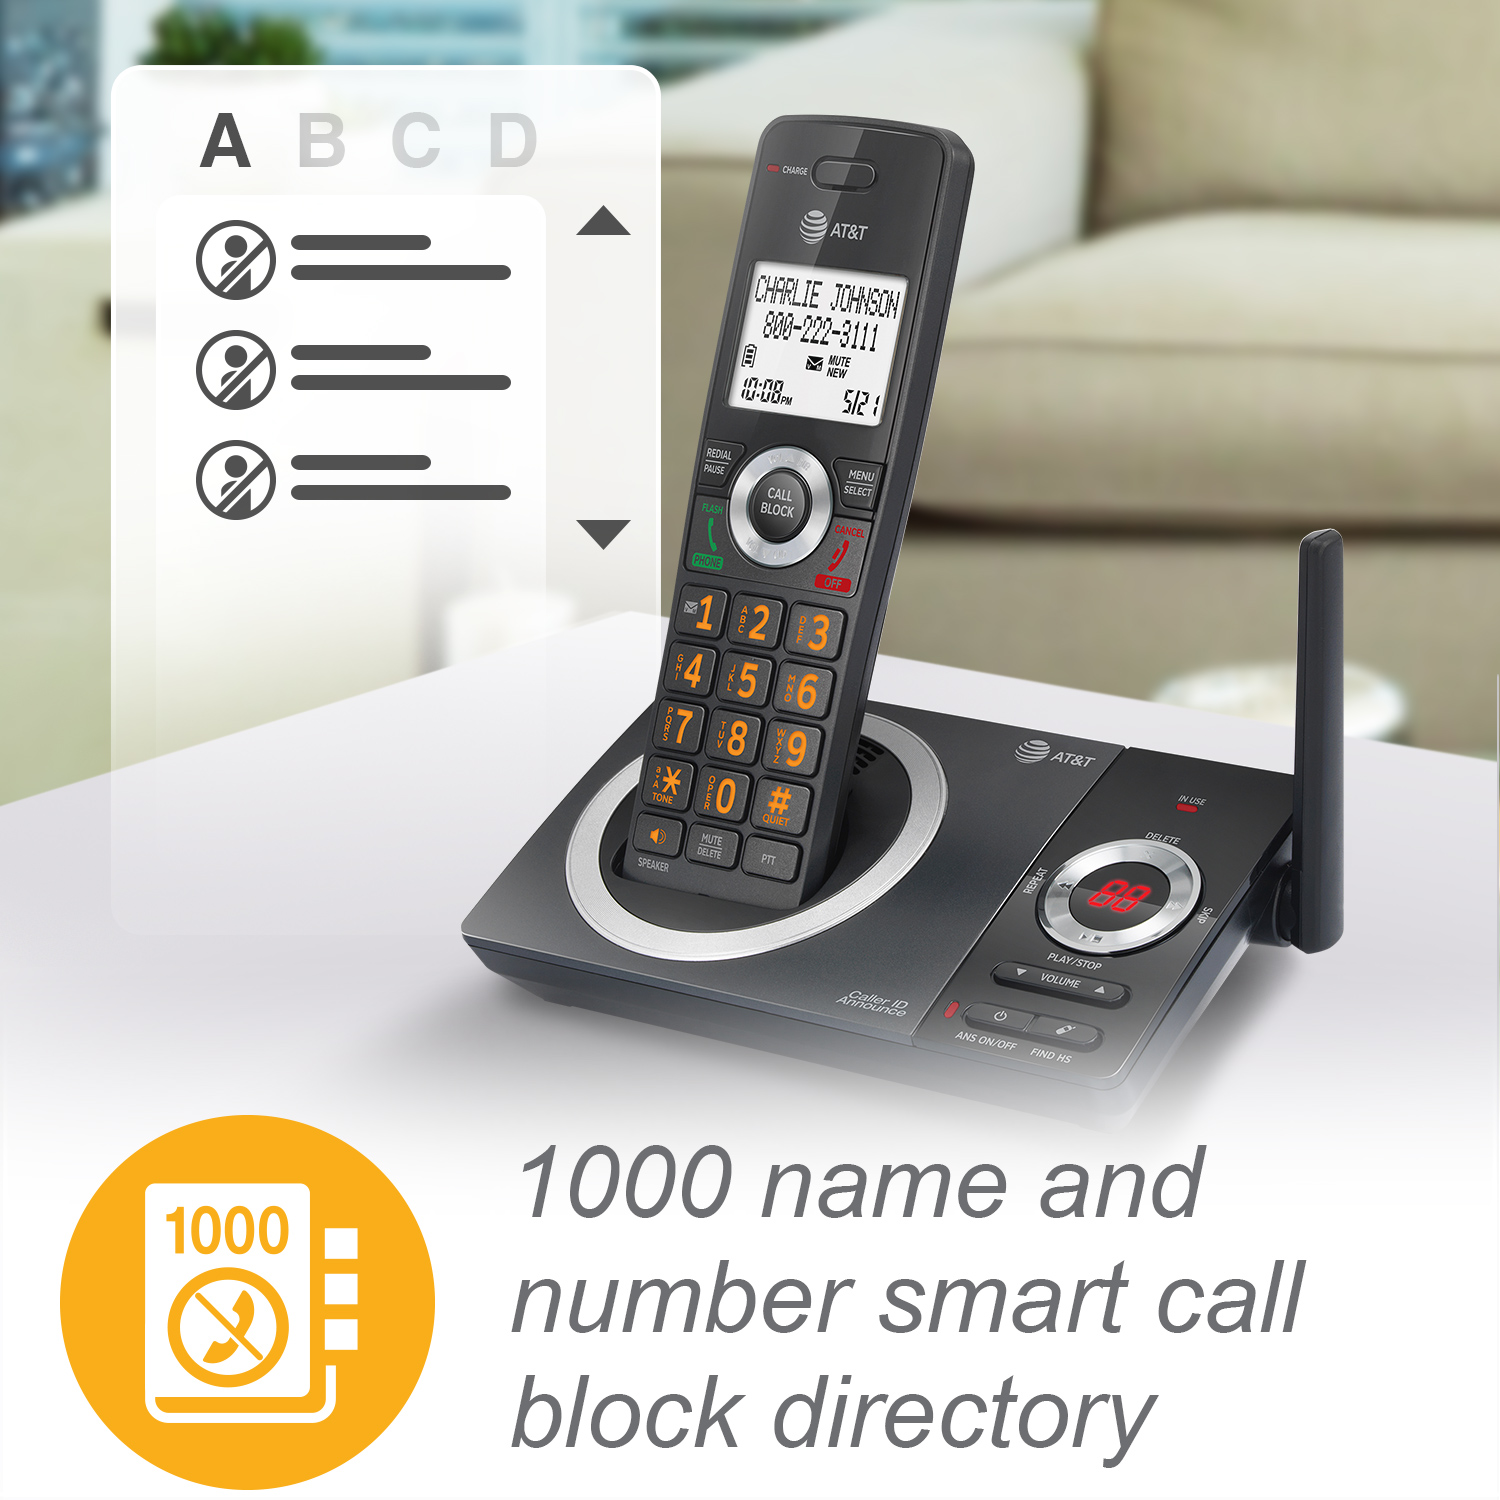 5-Handset Expandable Cordless Phone with Unsurpassed Range, Smart Call Blocker and Answering System - view 4